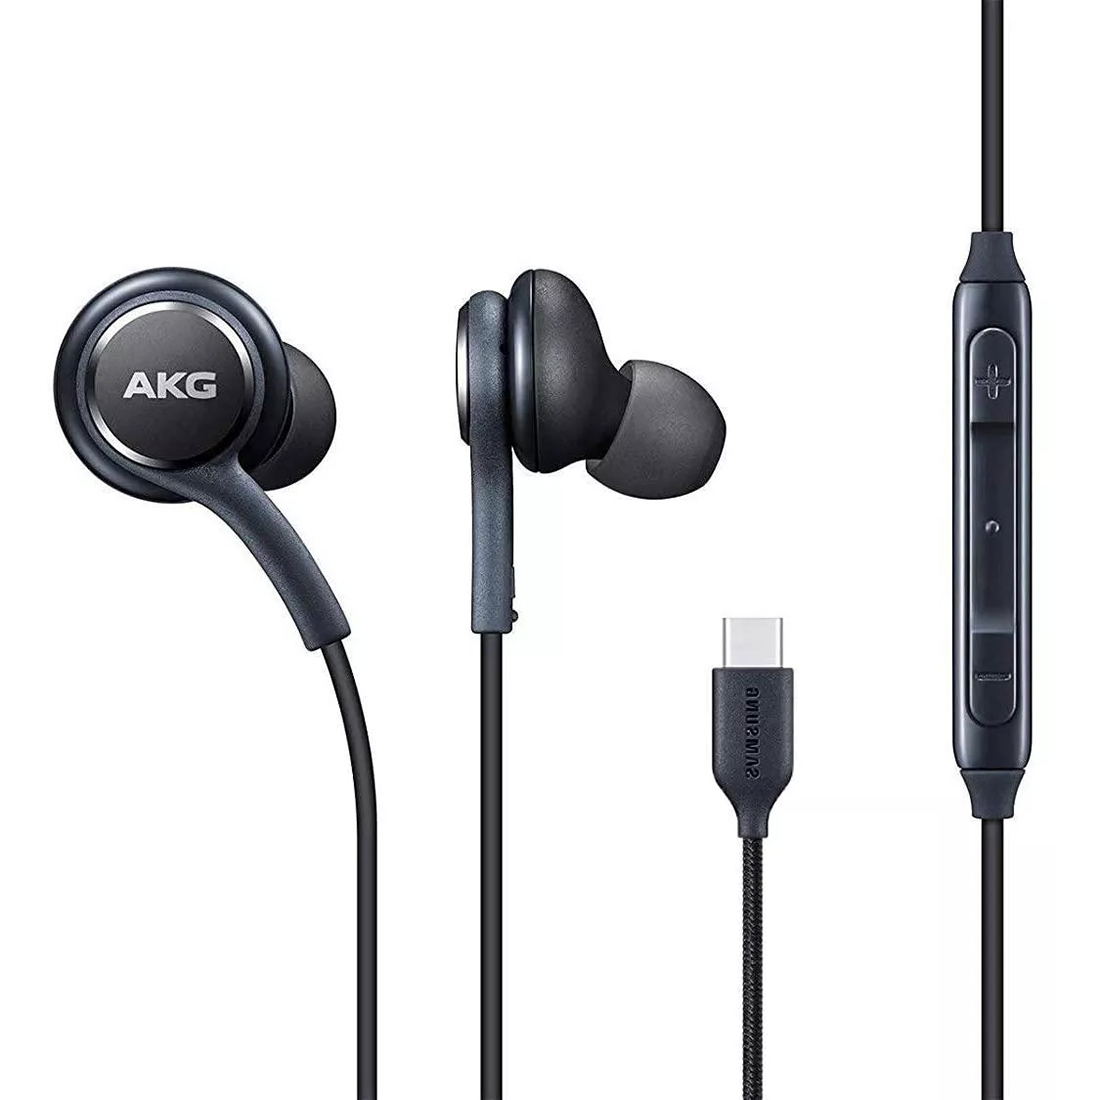 AKG TYPE-C Earphones for Galaxy Tab S7 (2020) Tablets - Headphones USB-C Earbuds w Mic Headset Black for Samsung Galaxy Tab S7 (2020) - image 1 of 3